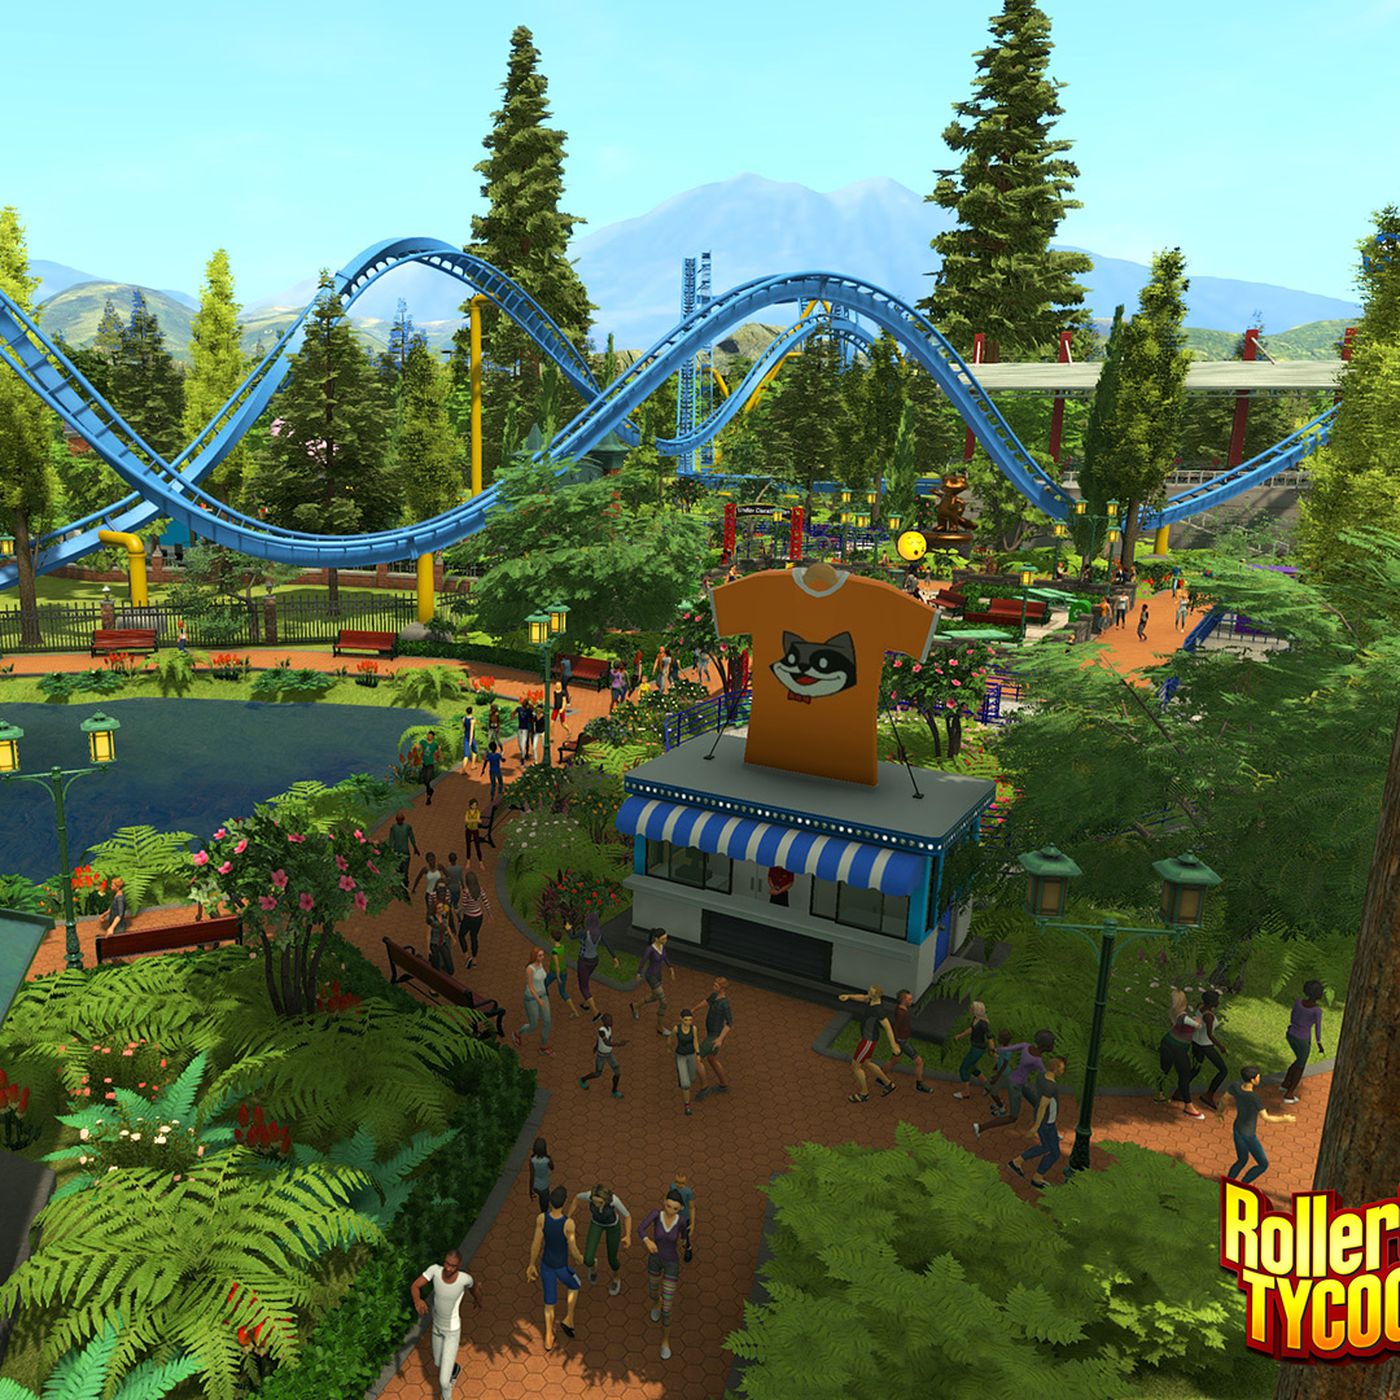 Rollercoaster Tycoon World S Focus On Freedom Makes It Exciting